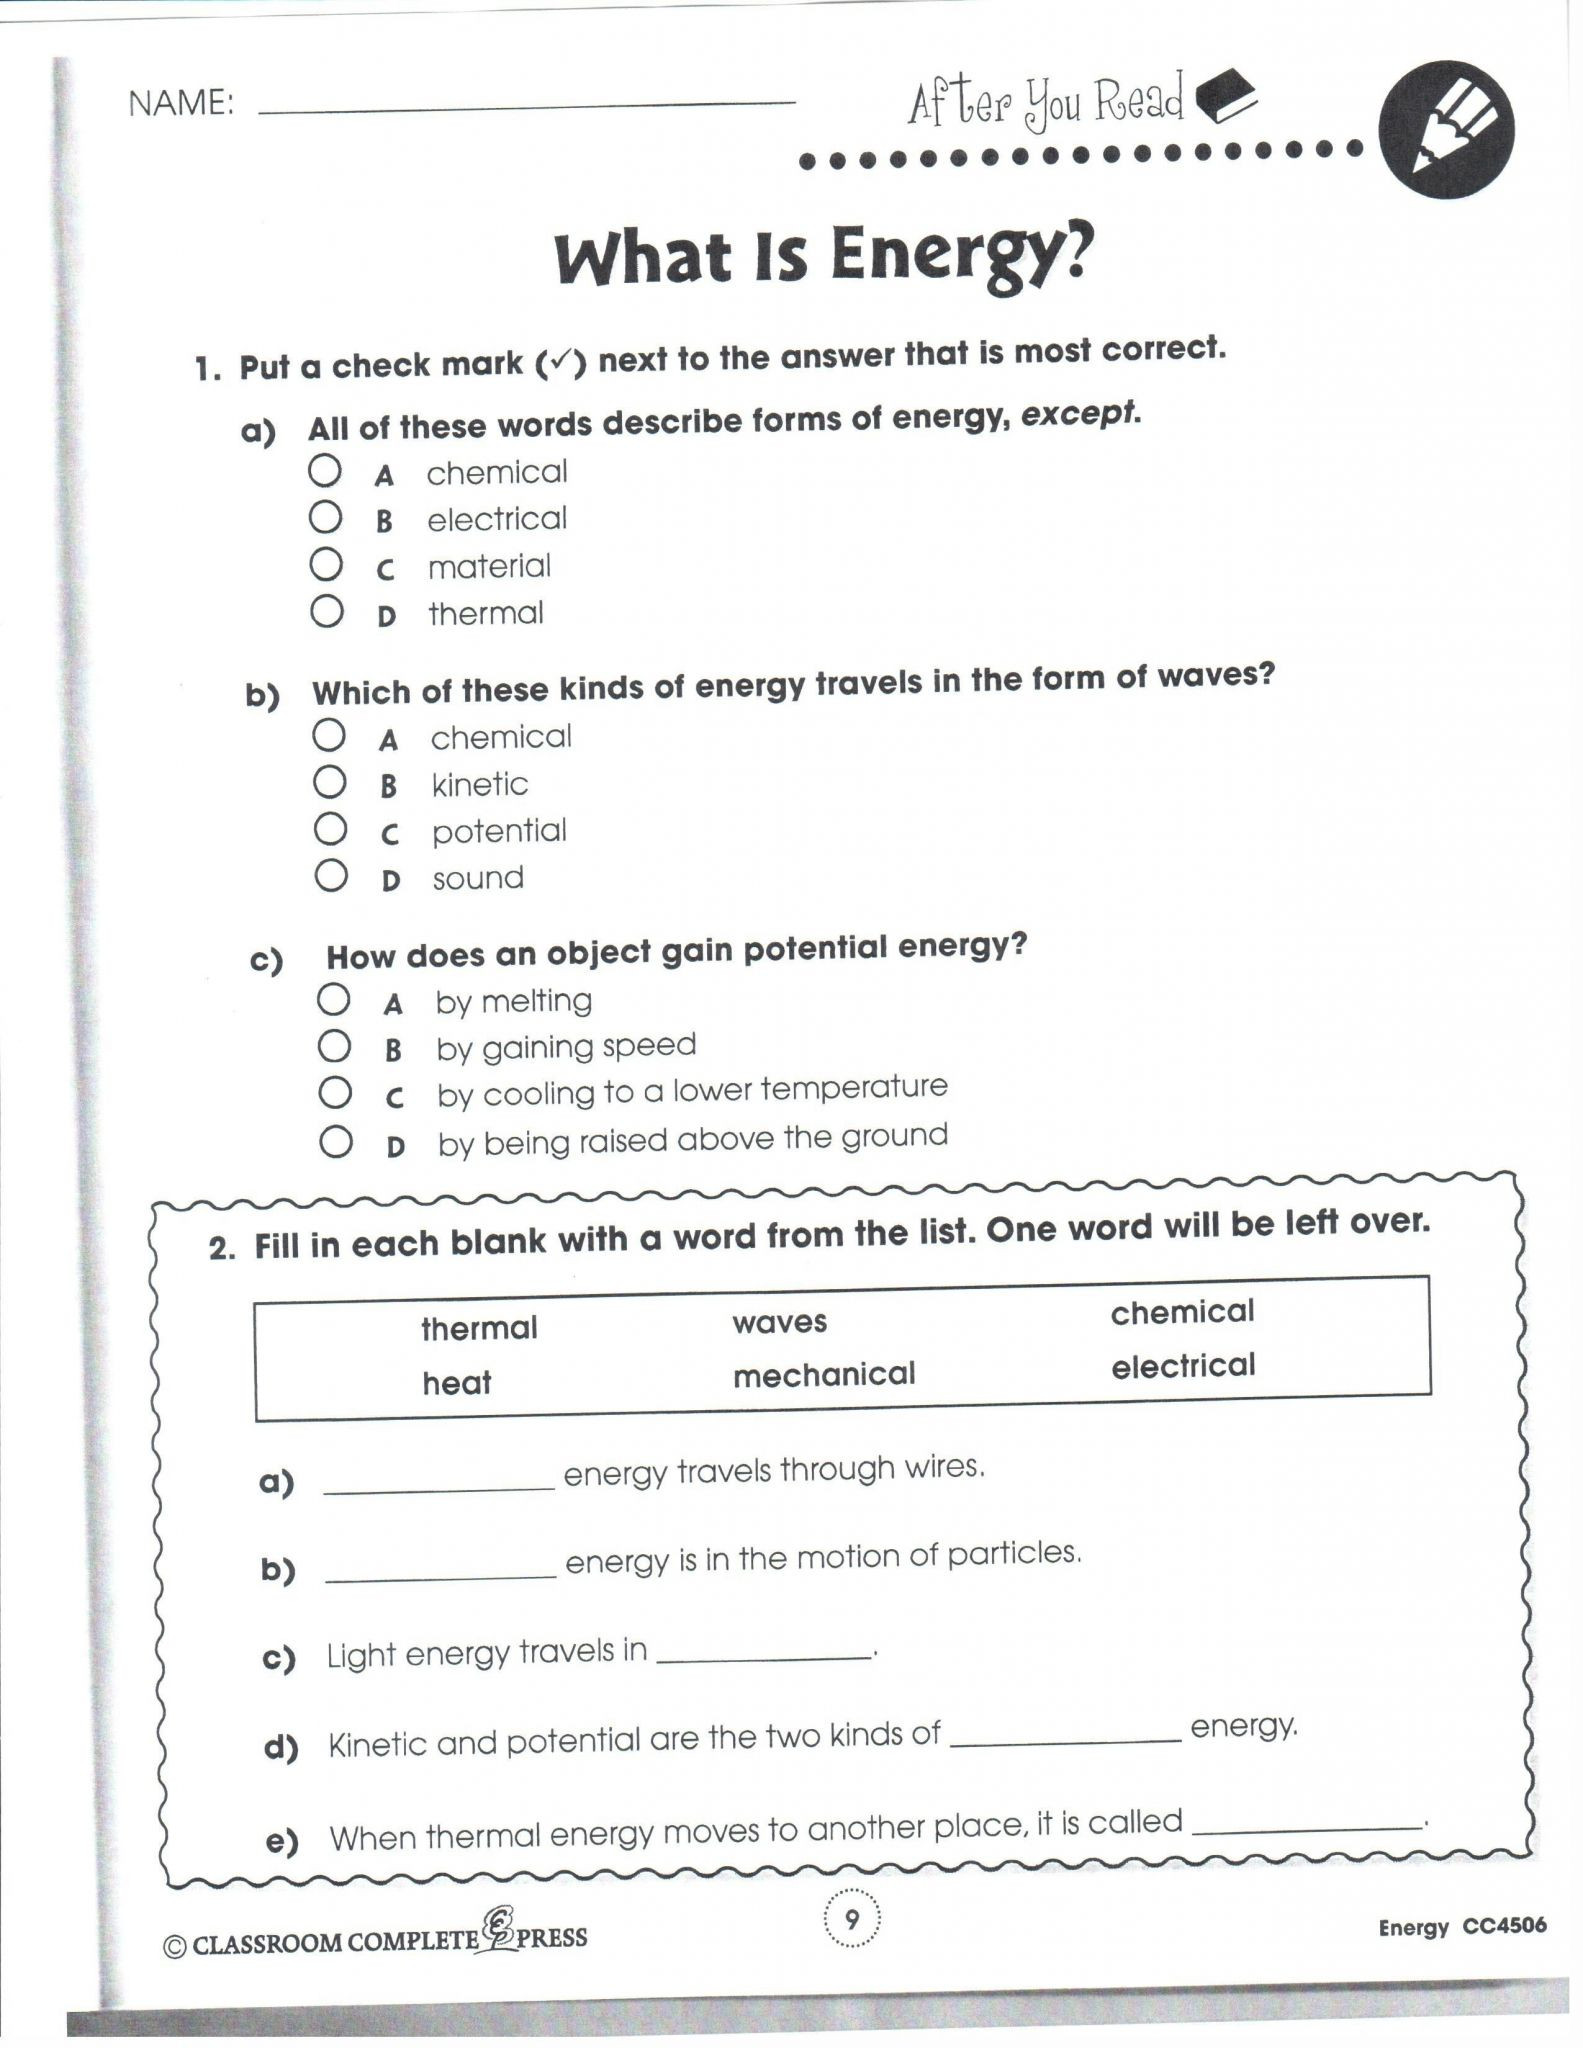 Scientific Method Practice Worksheet Science Worksheets for Grade Printable with Answers